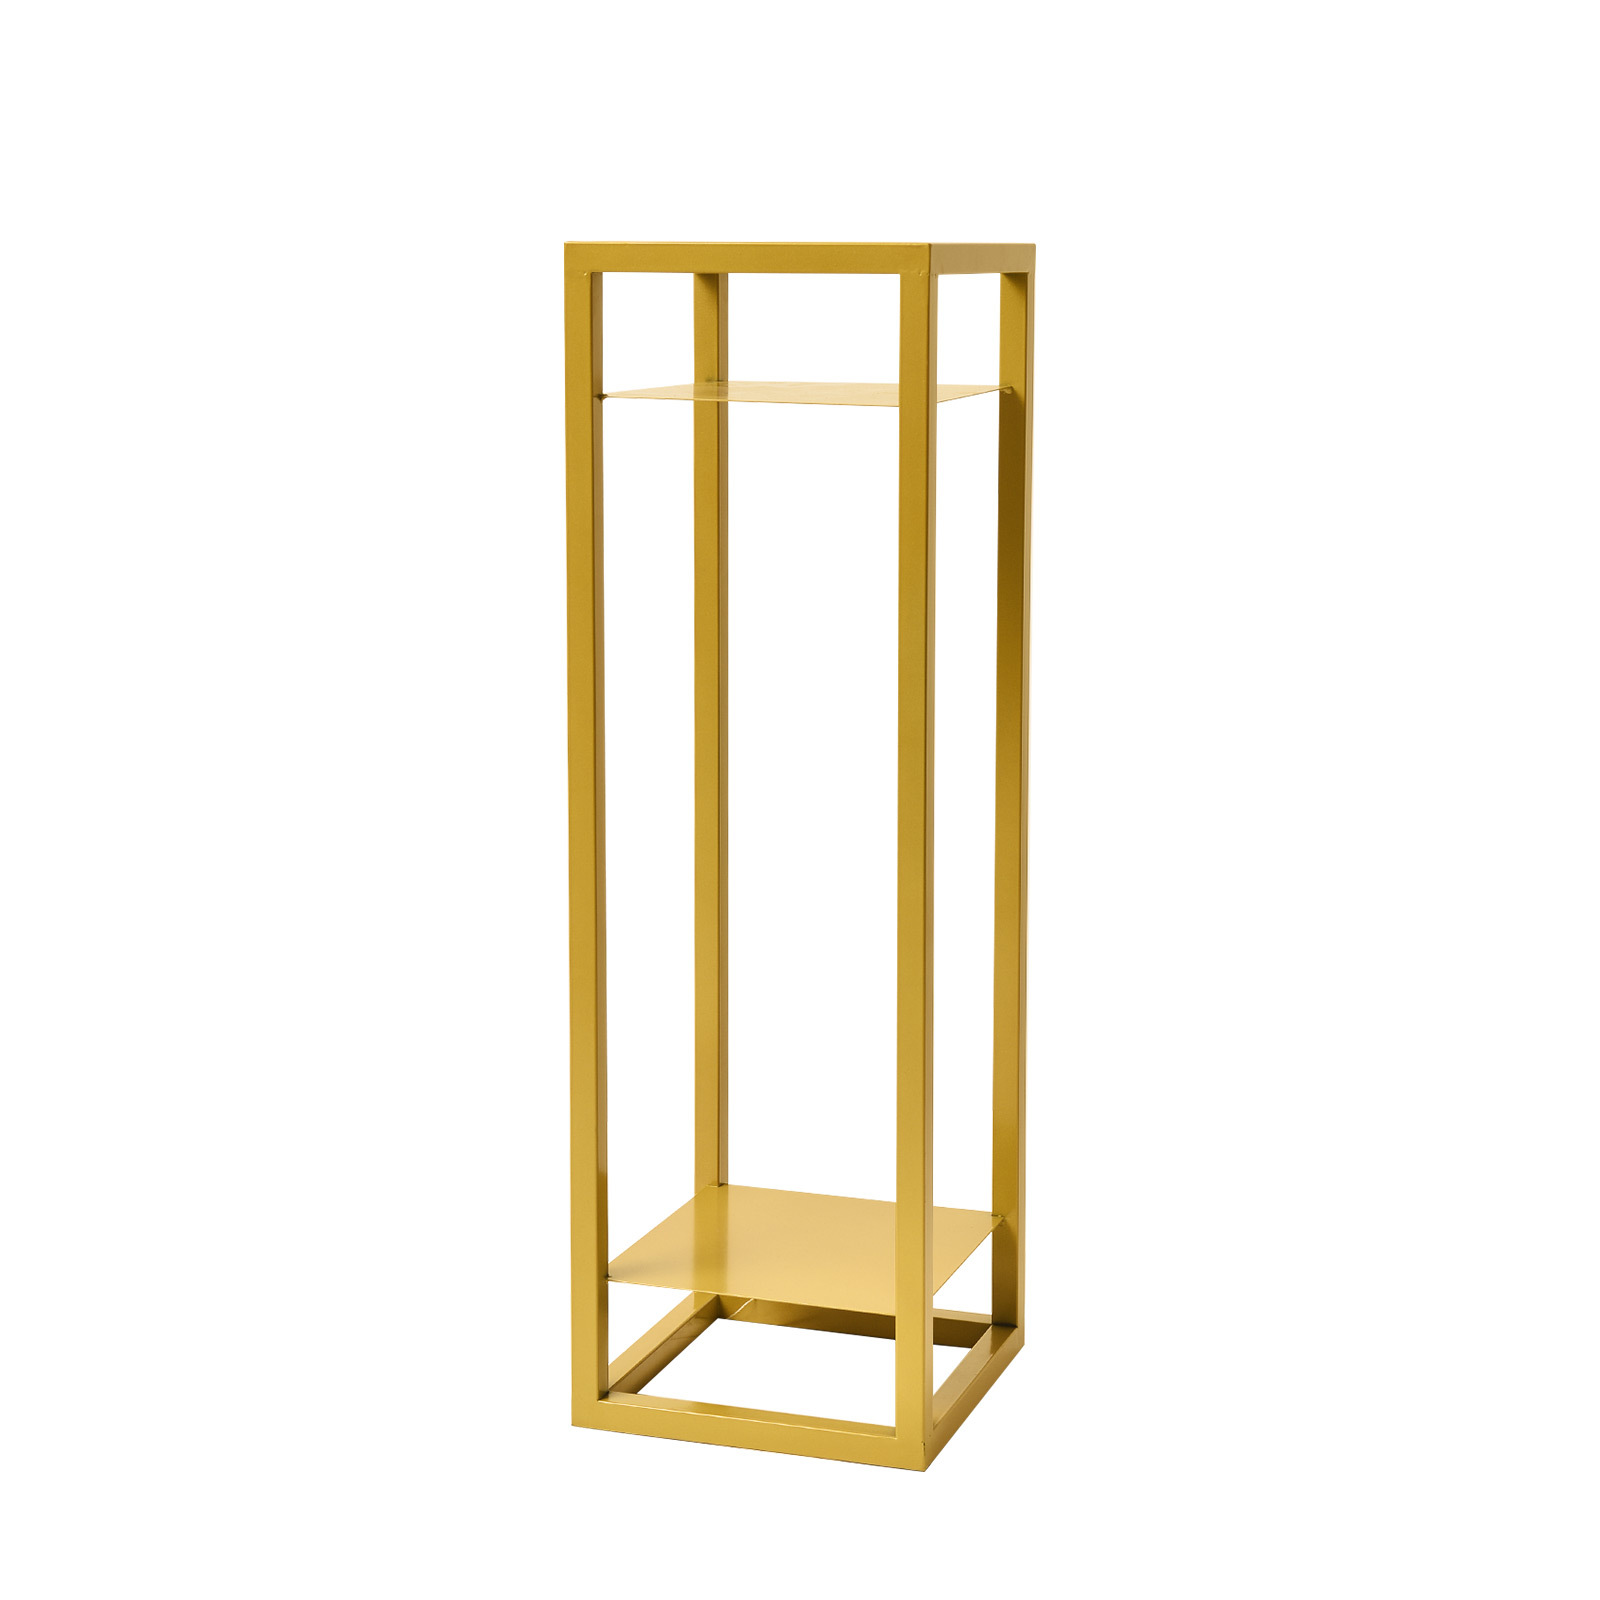 82cm Plant Stand Square 2 Tier - GOLD